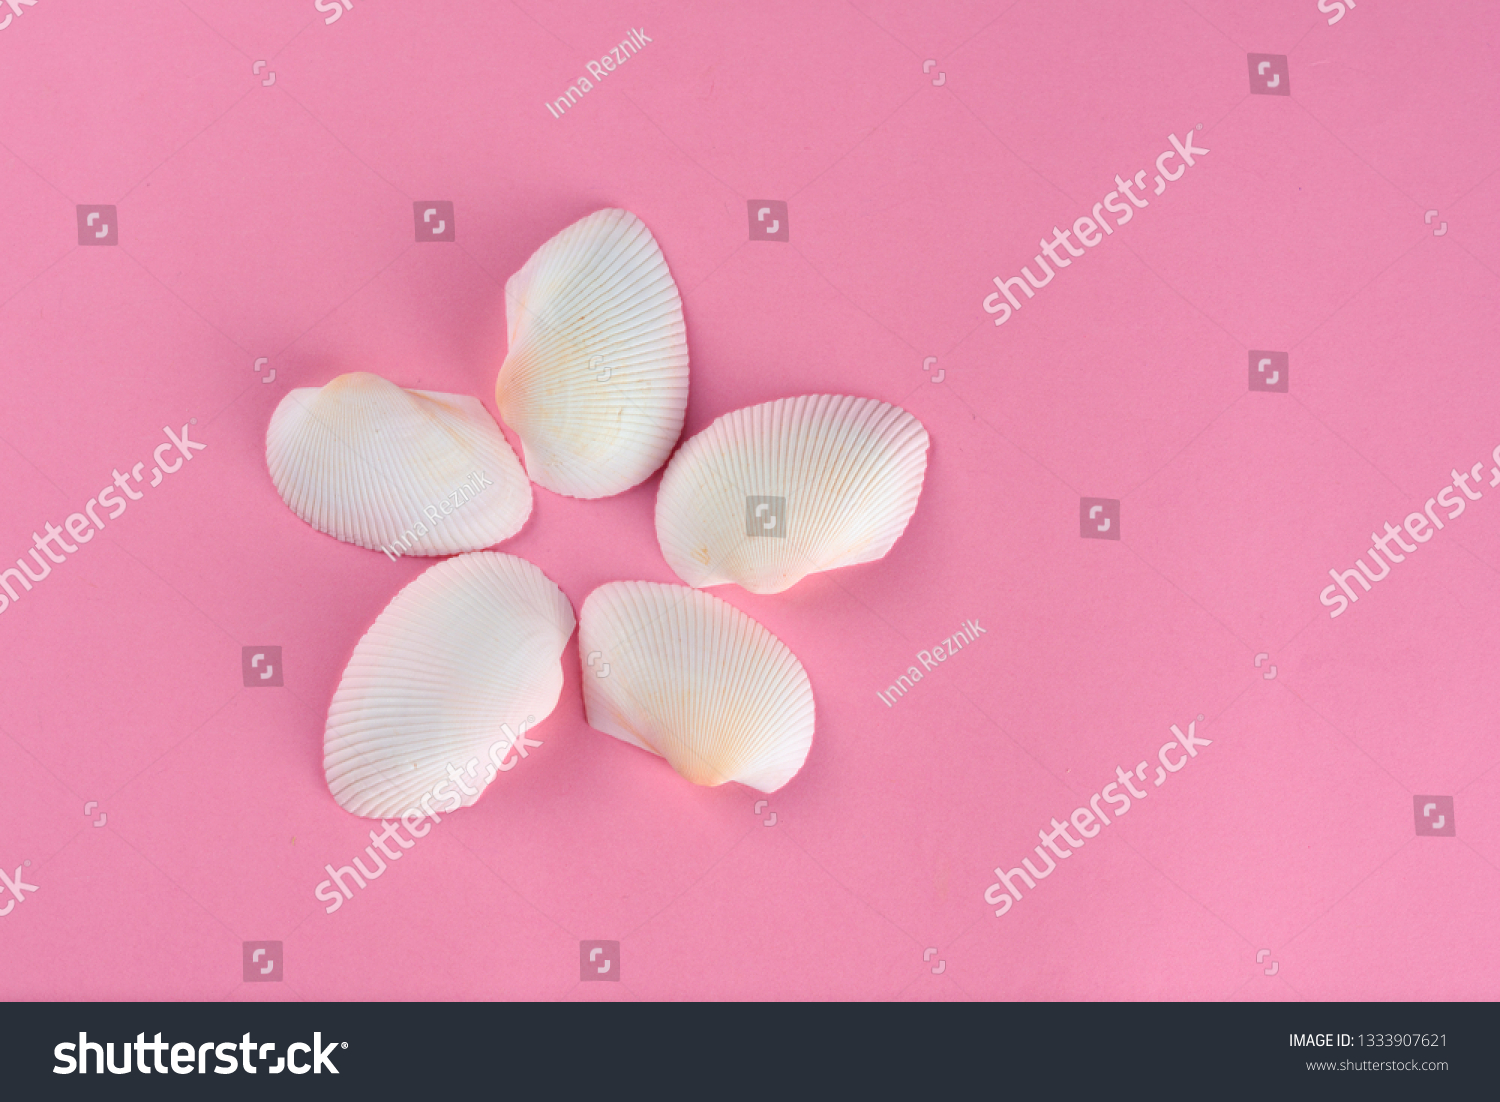 Seashell or sea shell on pink textured background. Original idea from natural material for summer design. Flat lay. #1333907621